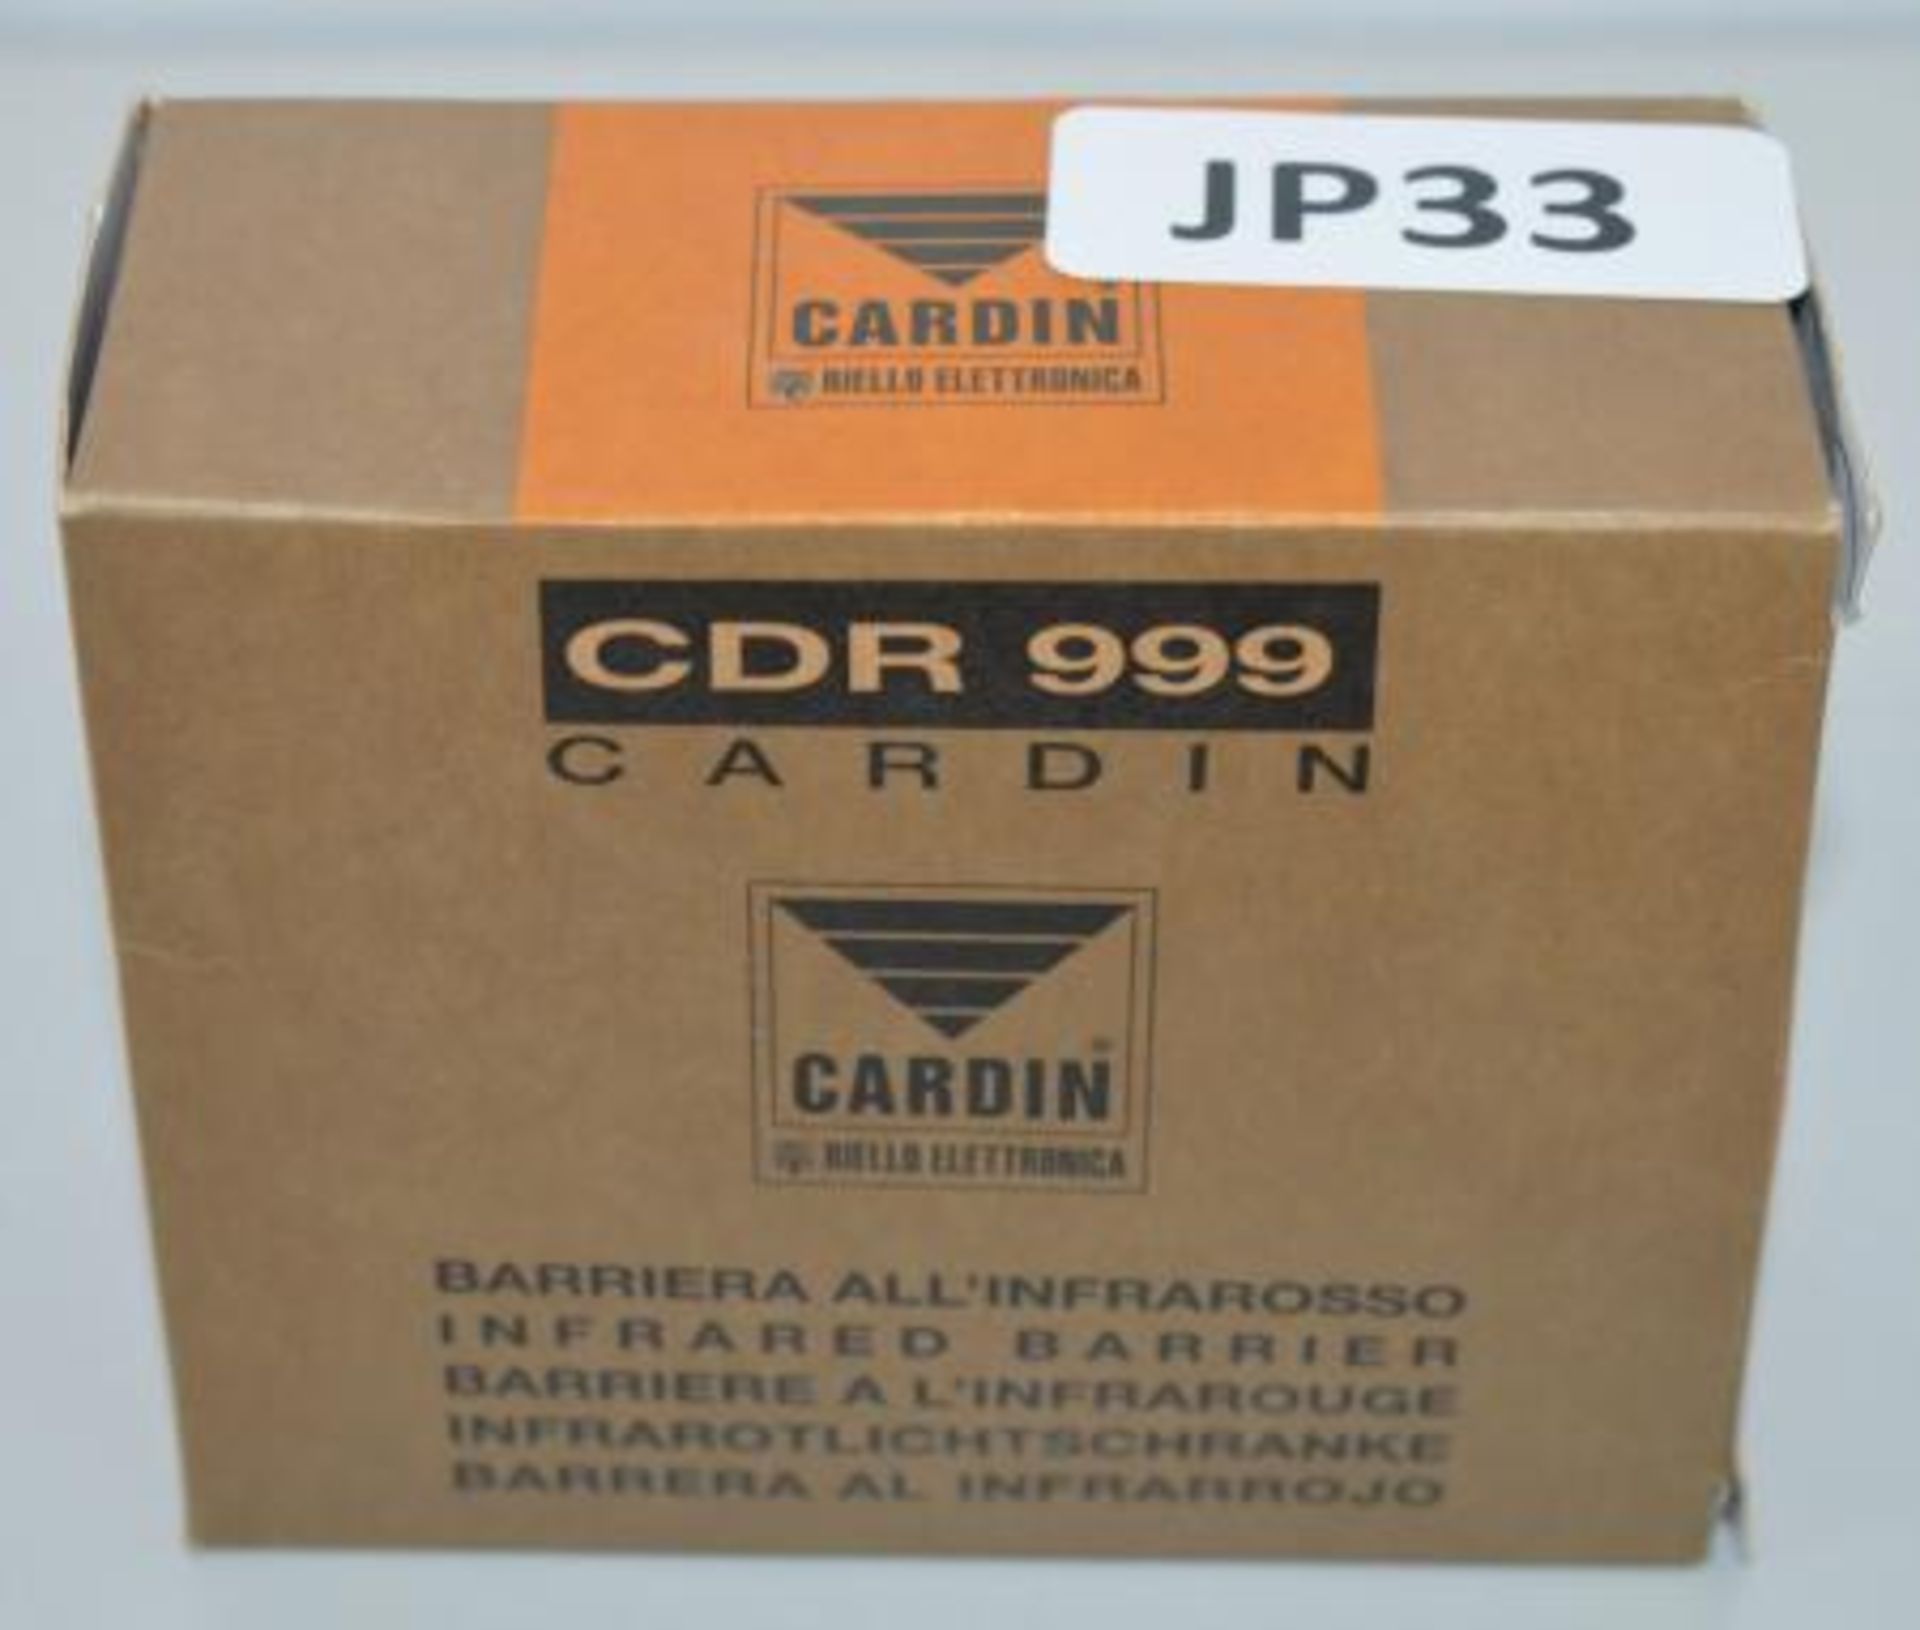 1 x Cardin CDR999 Surface Mounted Infra-red Sensors - New and Boxed - CL285 - Ref JP33 - Location: - Image 3 of 3